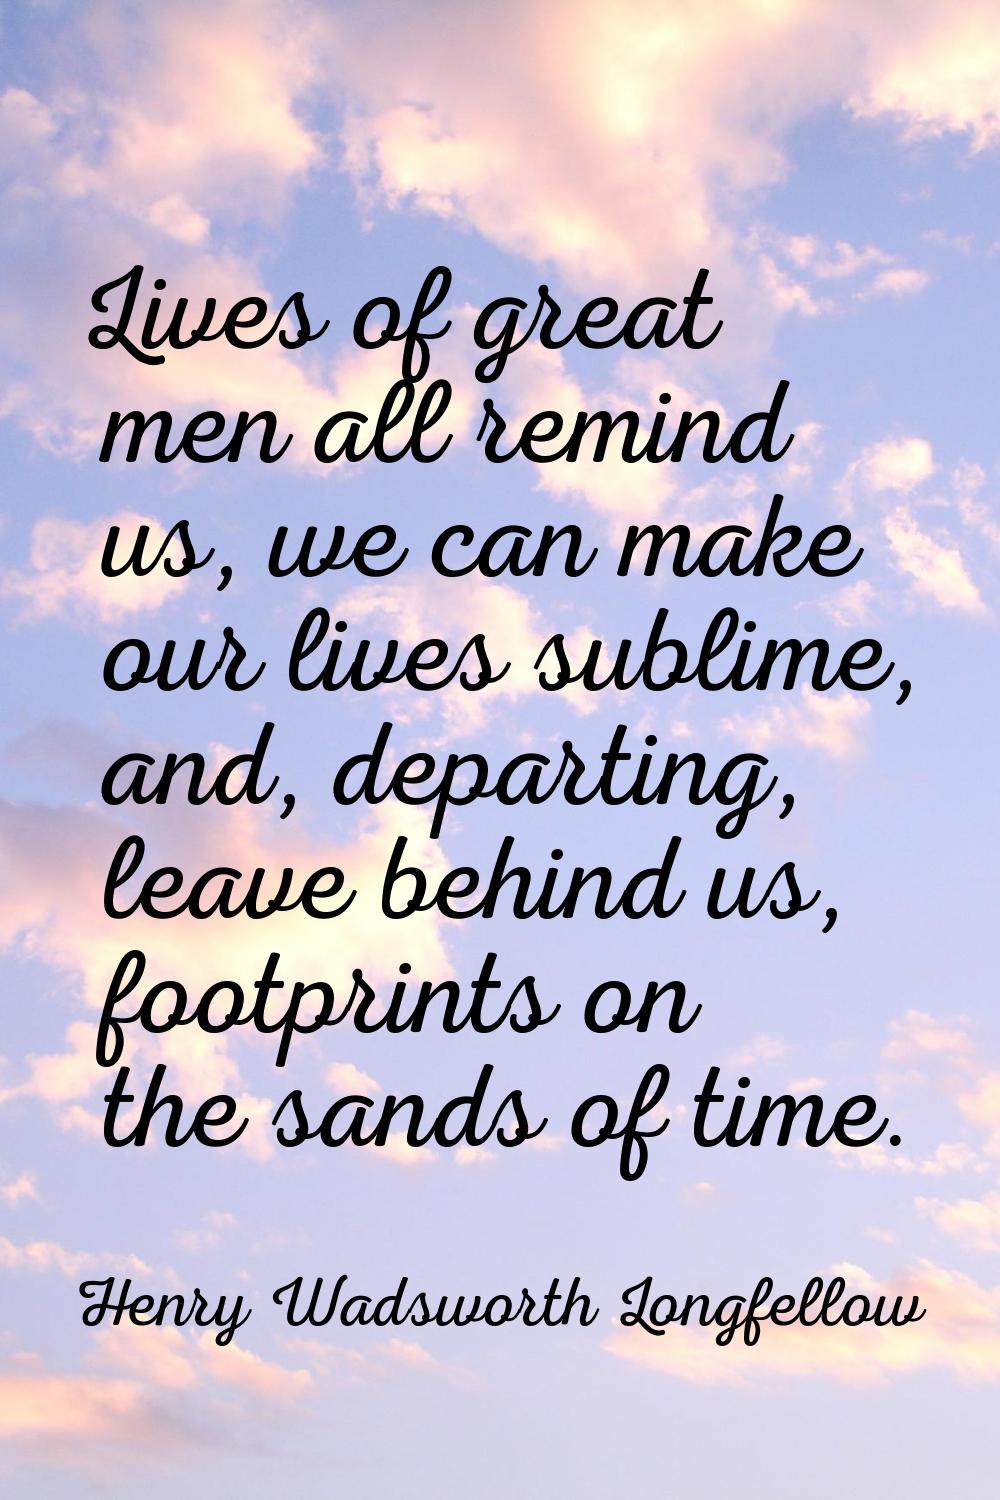 Lives of great men all remind us, we can make our lives sublime, and, departing, leave behind us, f